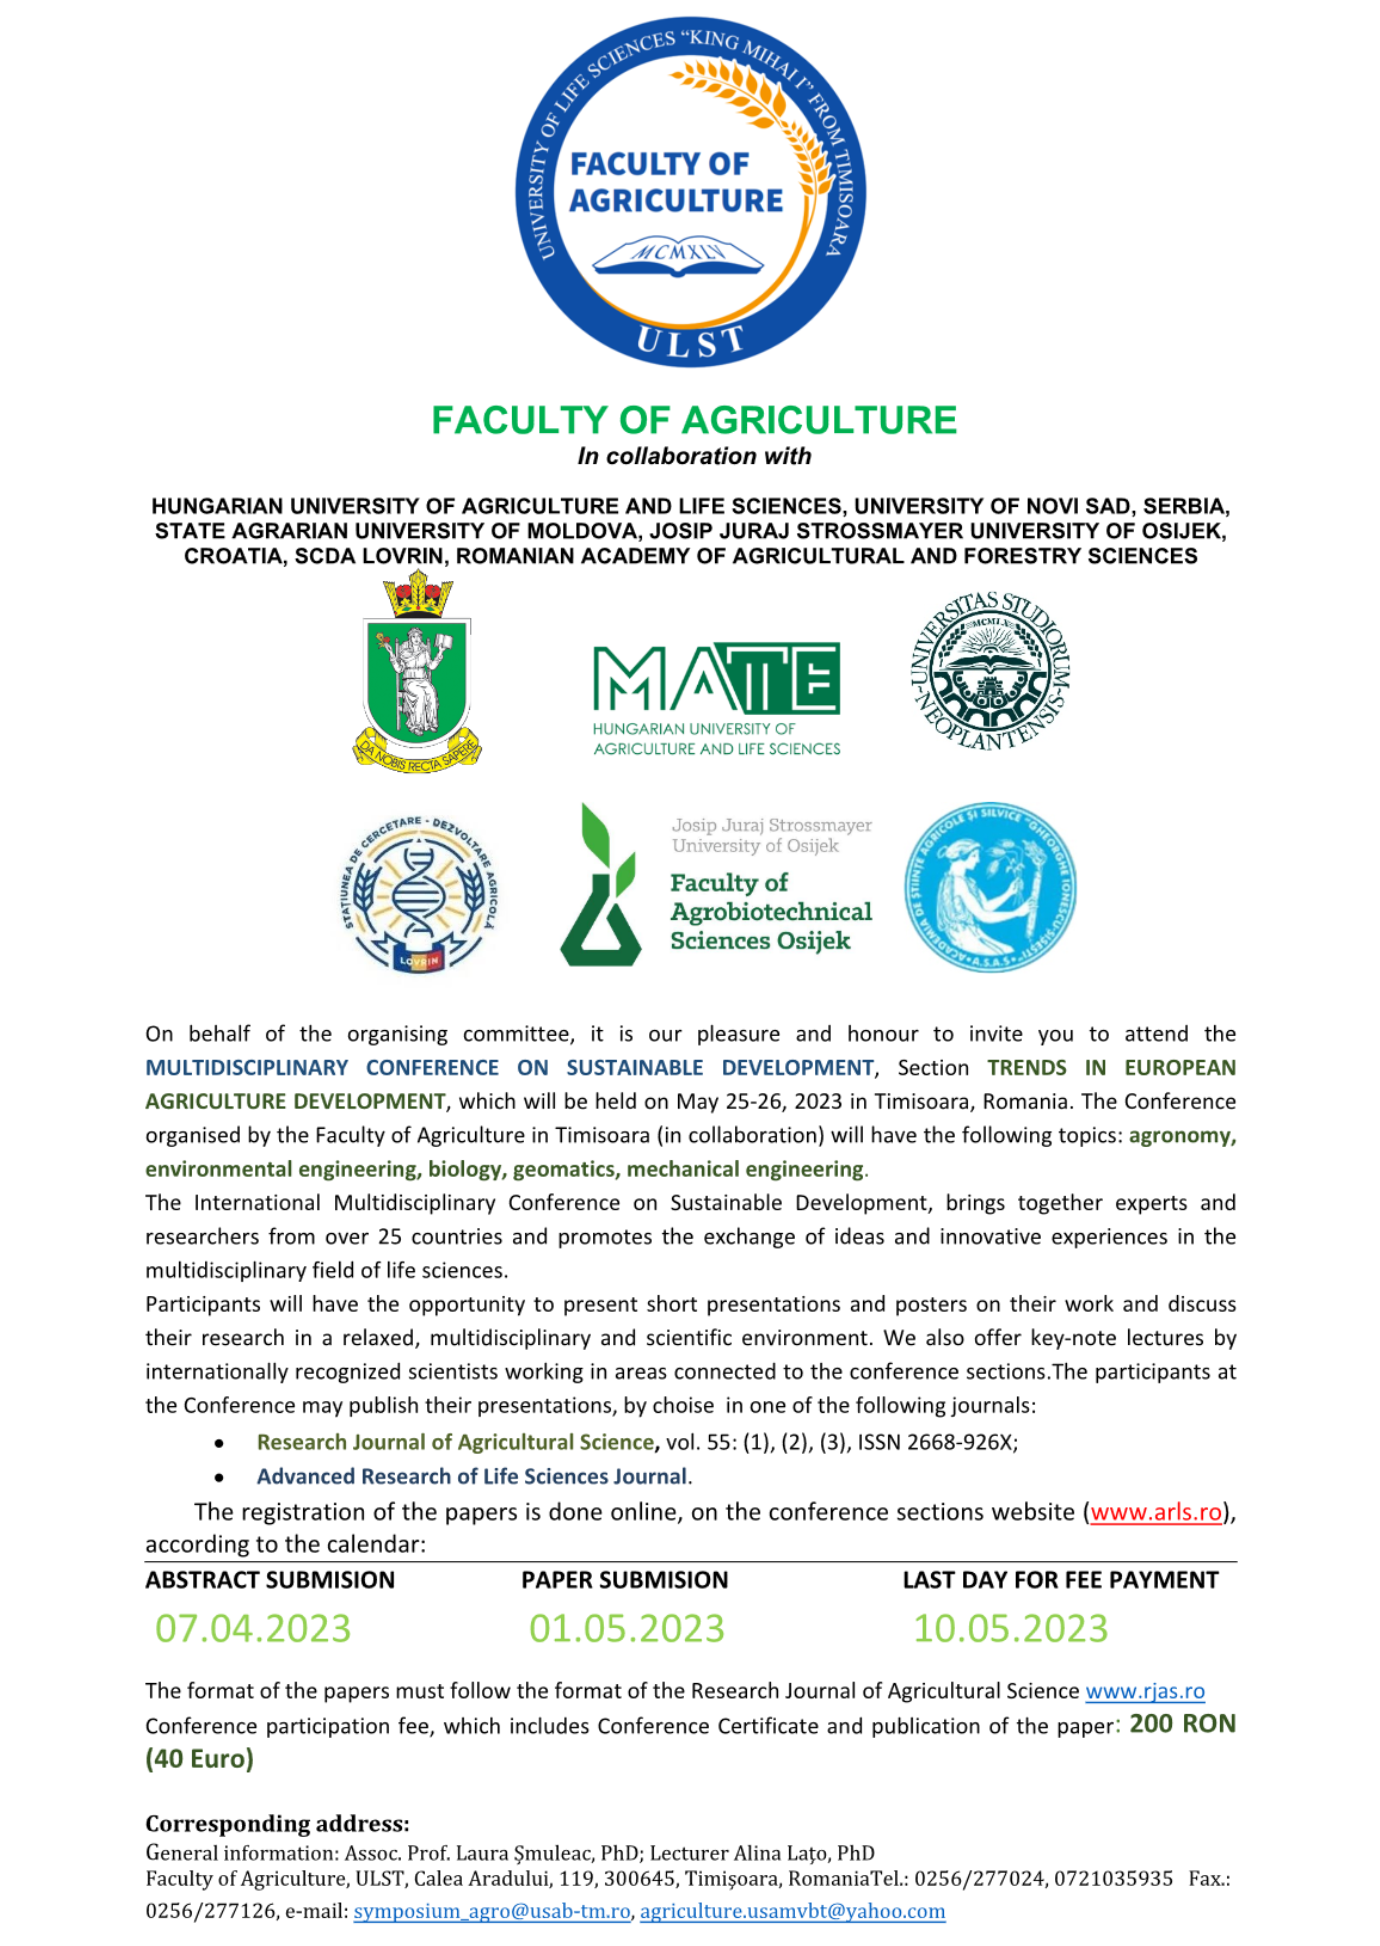 On behalf of the organising committee, it is our pleasure and honour to invite you to attend the MULTIDISCIPLINARY CONFERENCE ON SUSTAINABLE DEVELOPMENT, Section TRENDS IN EUROPEAN AGRICULTURE DEVELOPMENT, which will be held on May 25-26, 2023 in Timisoara, Romania. The Conference organised by the Faculty of Agriculture in Timisoara (in collaboration) will have the following topics: agronomy, environmental engineering, biology, geomatics, mechanical engineering.